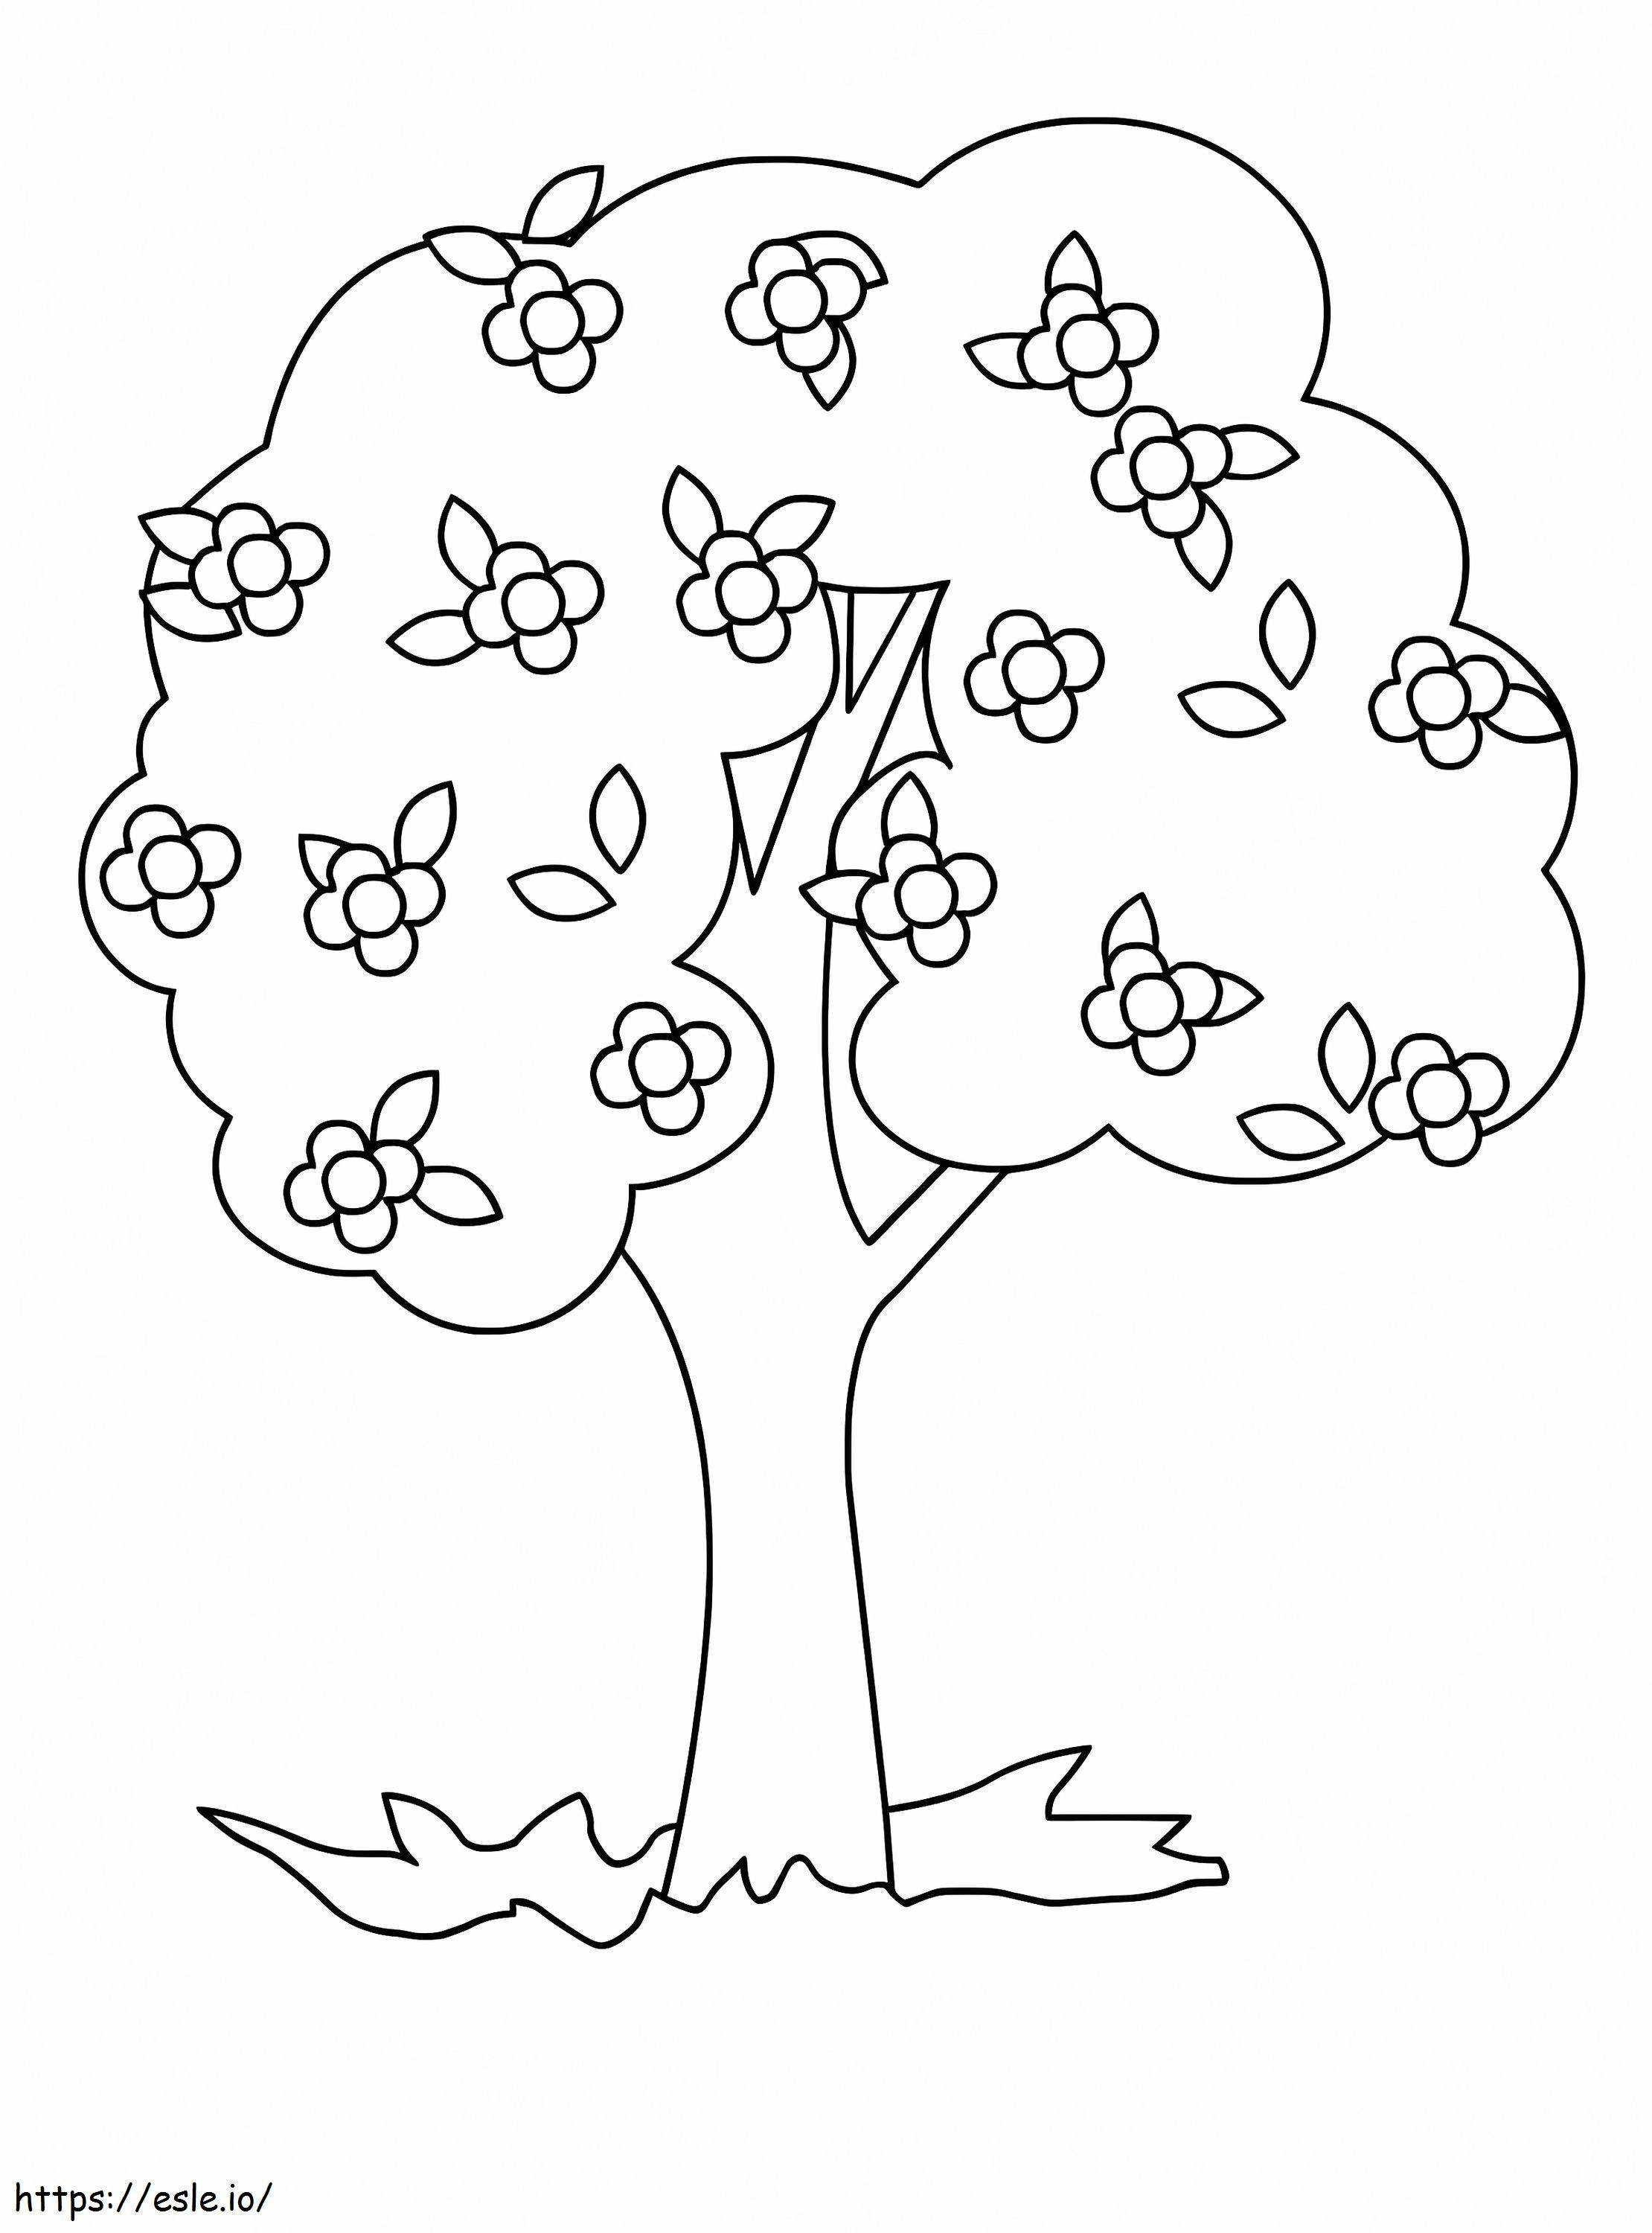 Spring Tree 3 coloring page